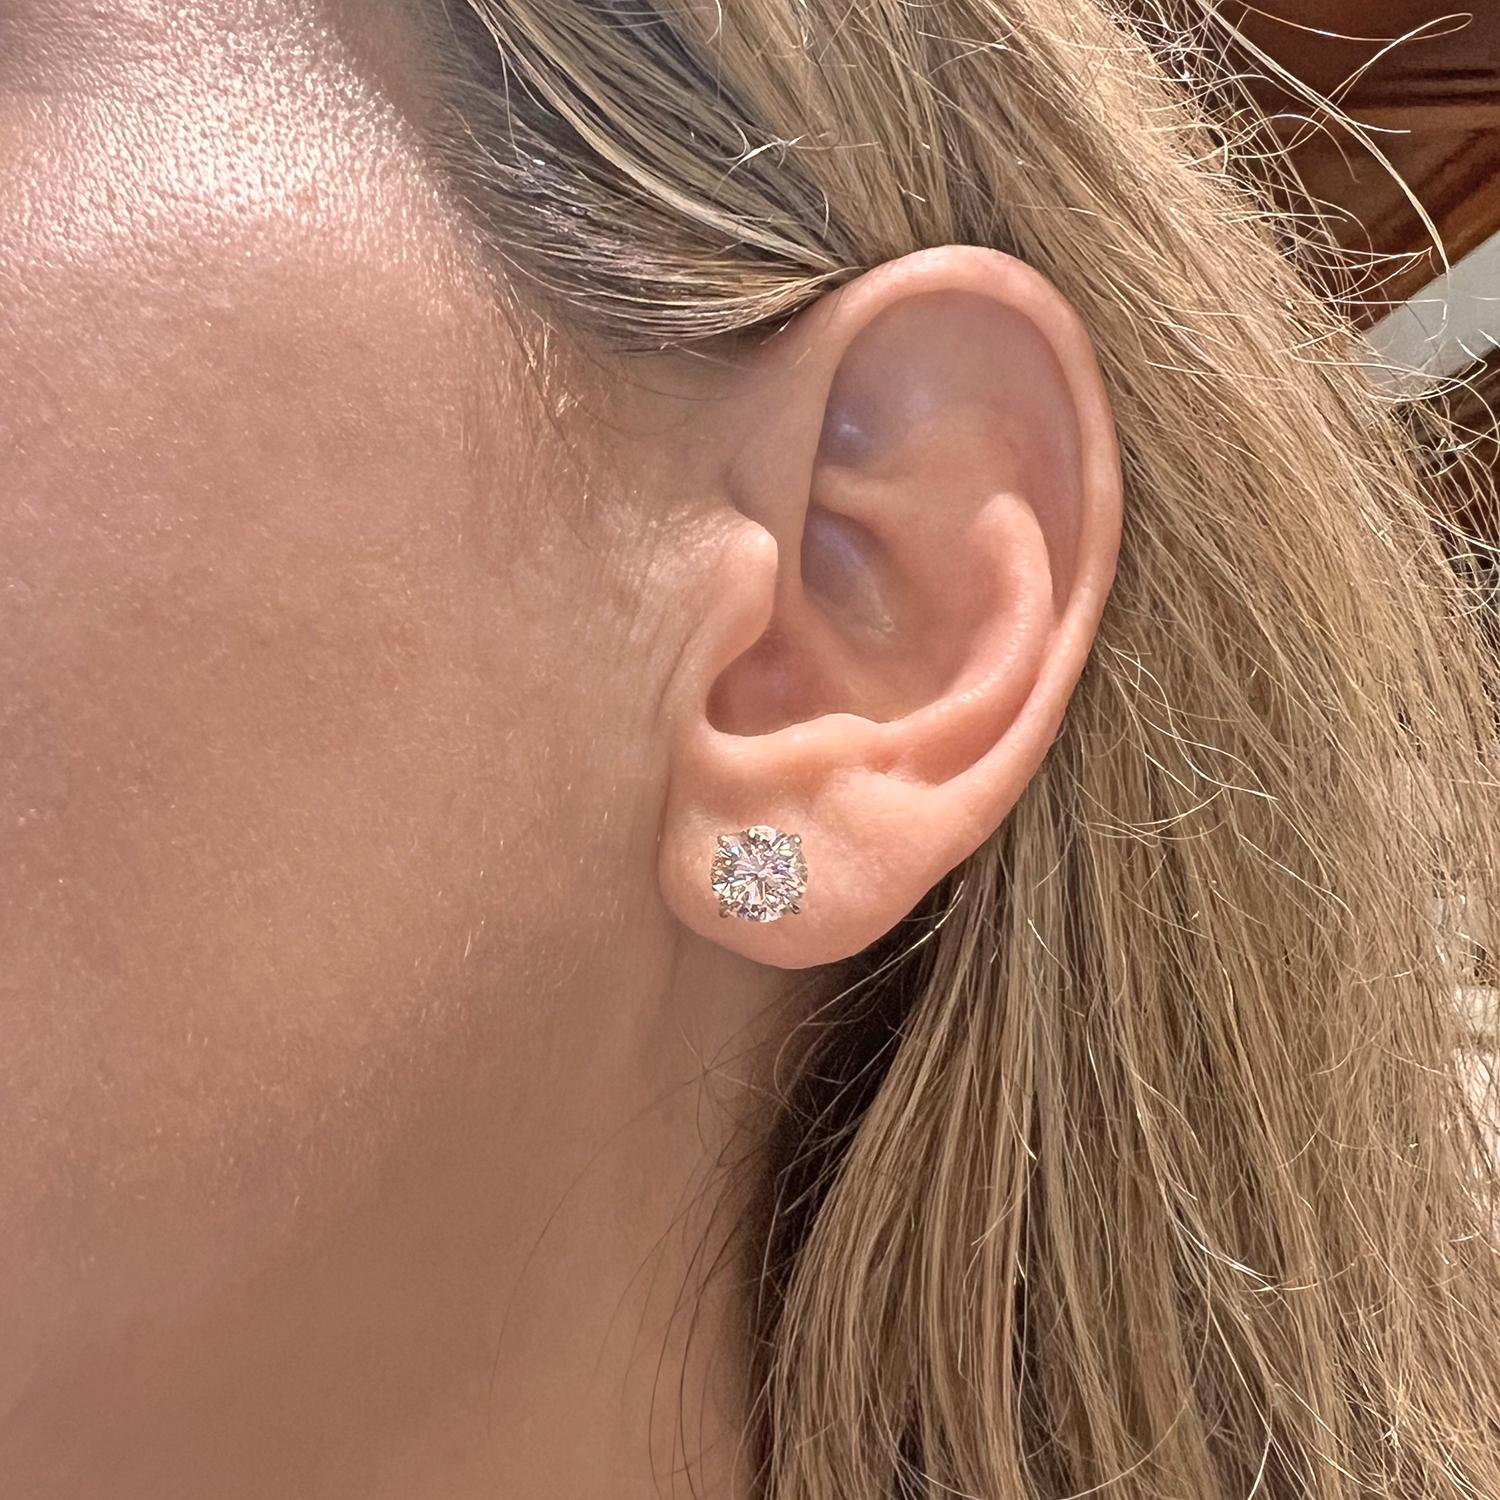 Round brilliant-cut diamond stud earrings, showcasing a pair of well-matched colorless diamonds weighing 3.02 total carats, the diamonds secured in four-prong platinum martini settings with posts for pierced ears. Both diamonds are F-color and